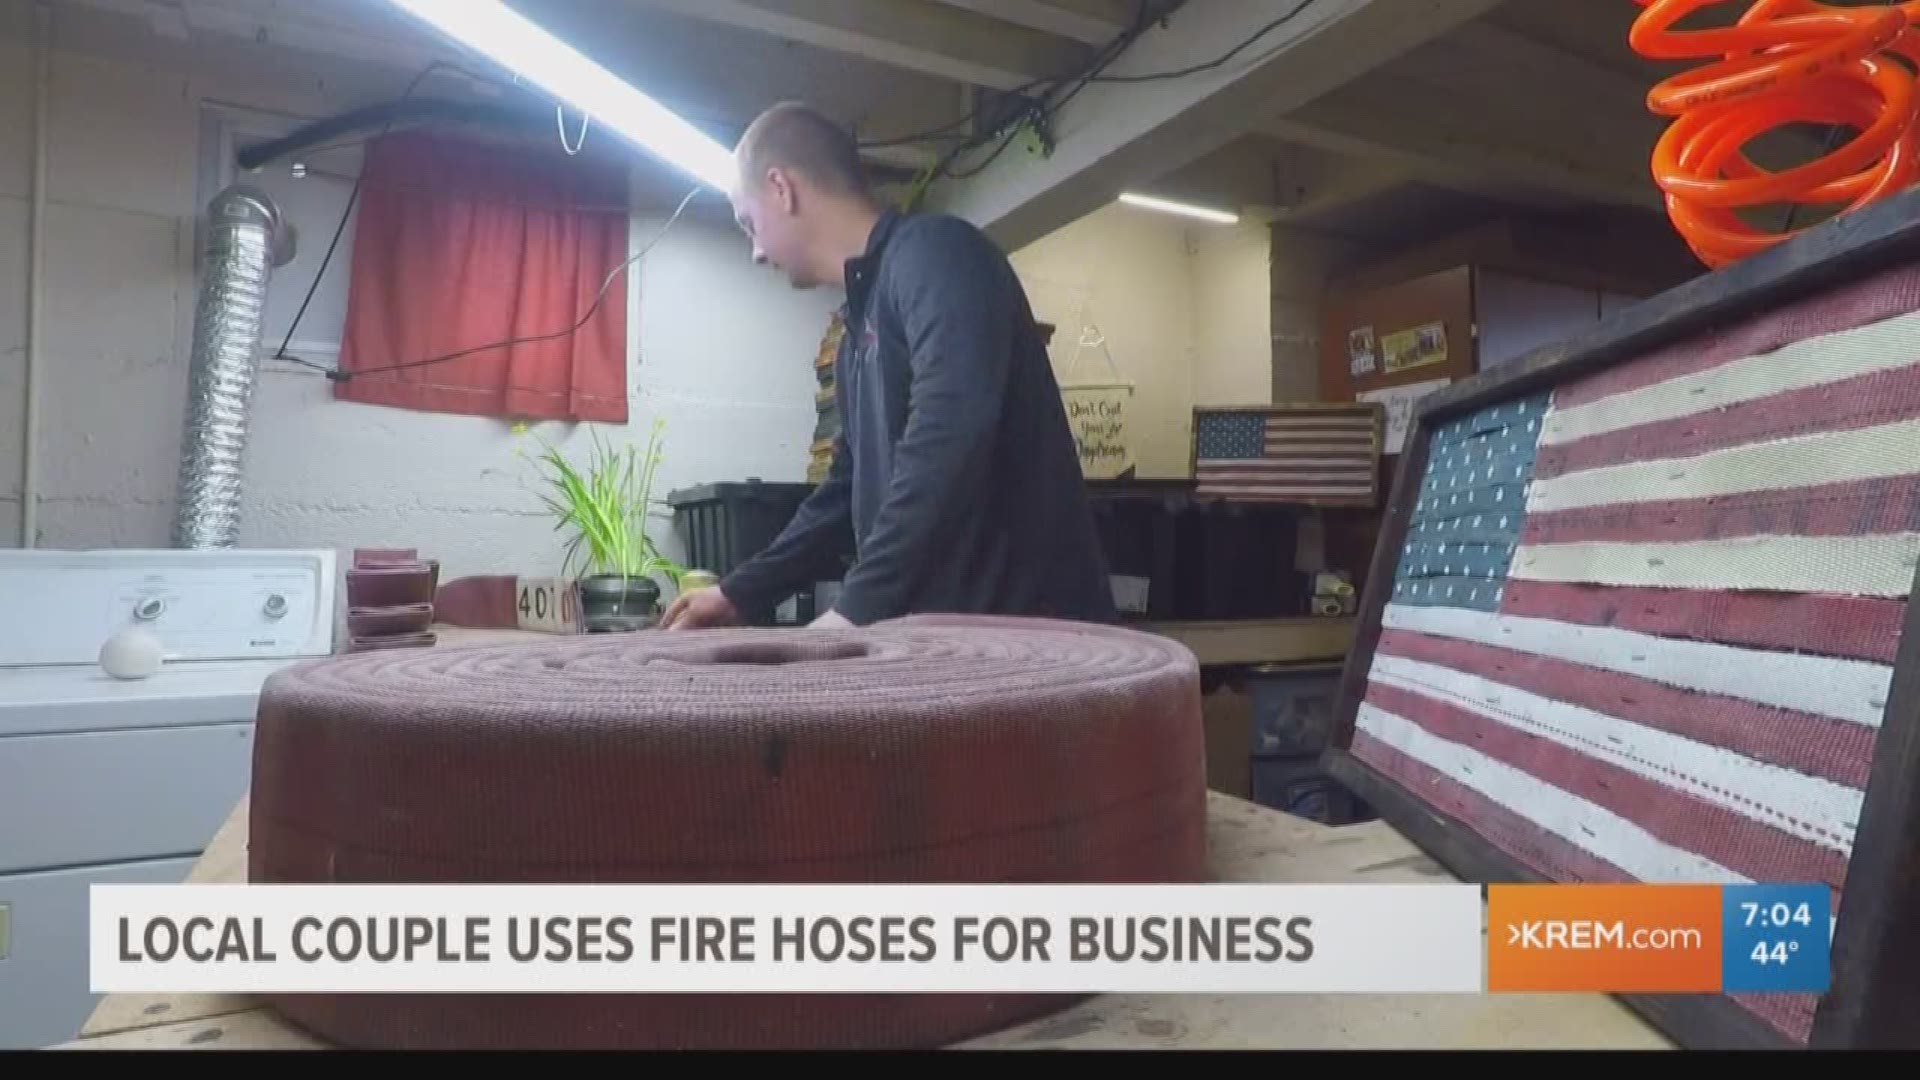 A Spokane couple with a backyard full of fire hoses is running a unique business. They make beer koozies, flasks, coasters and American flags out of the retired hoses.